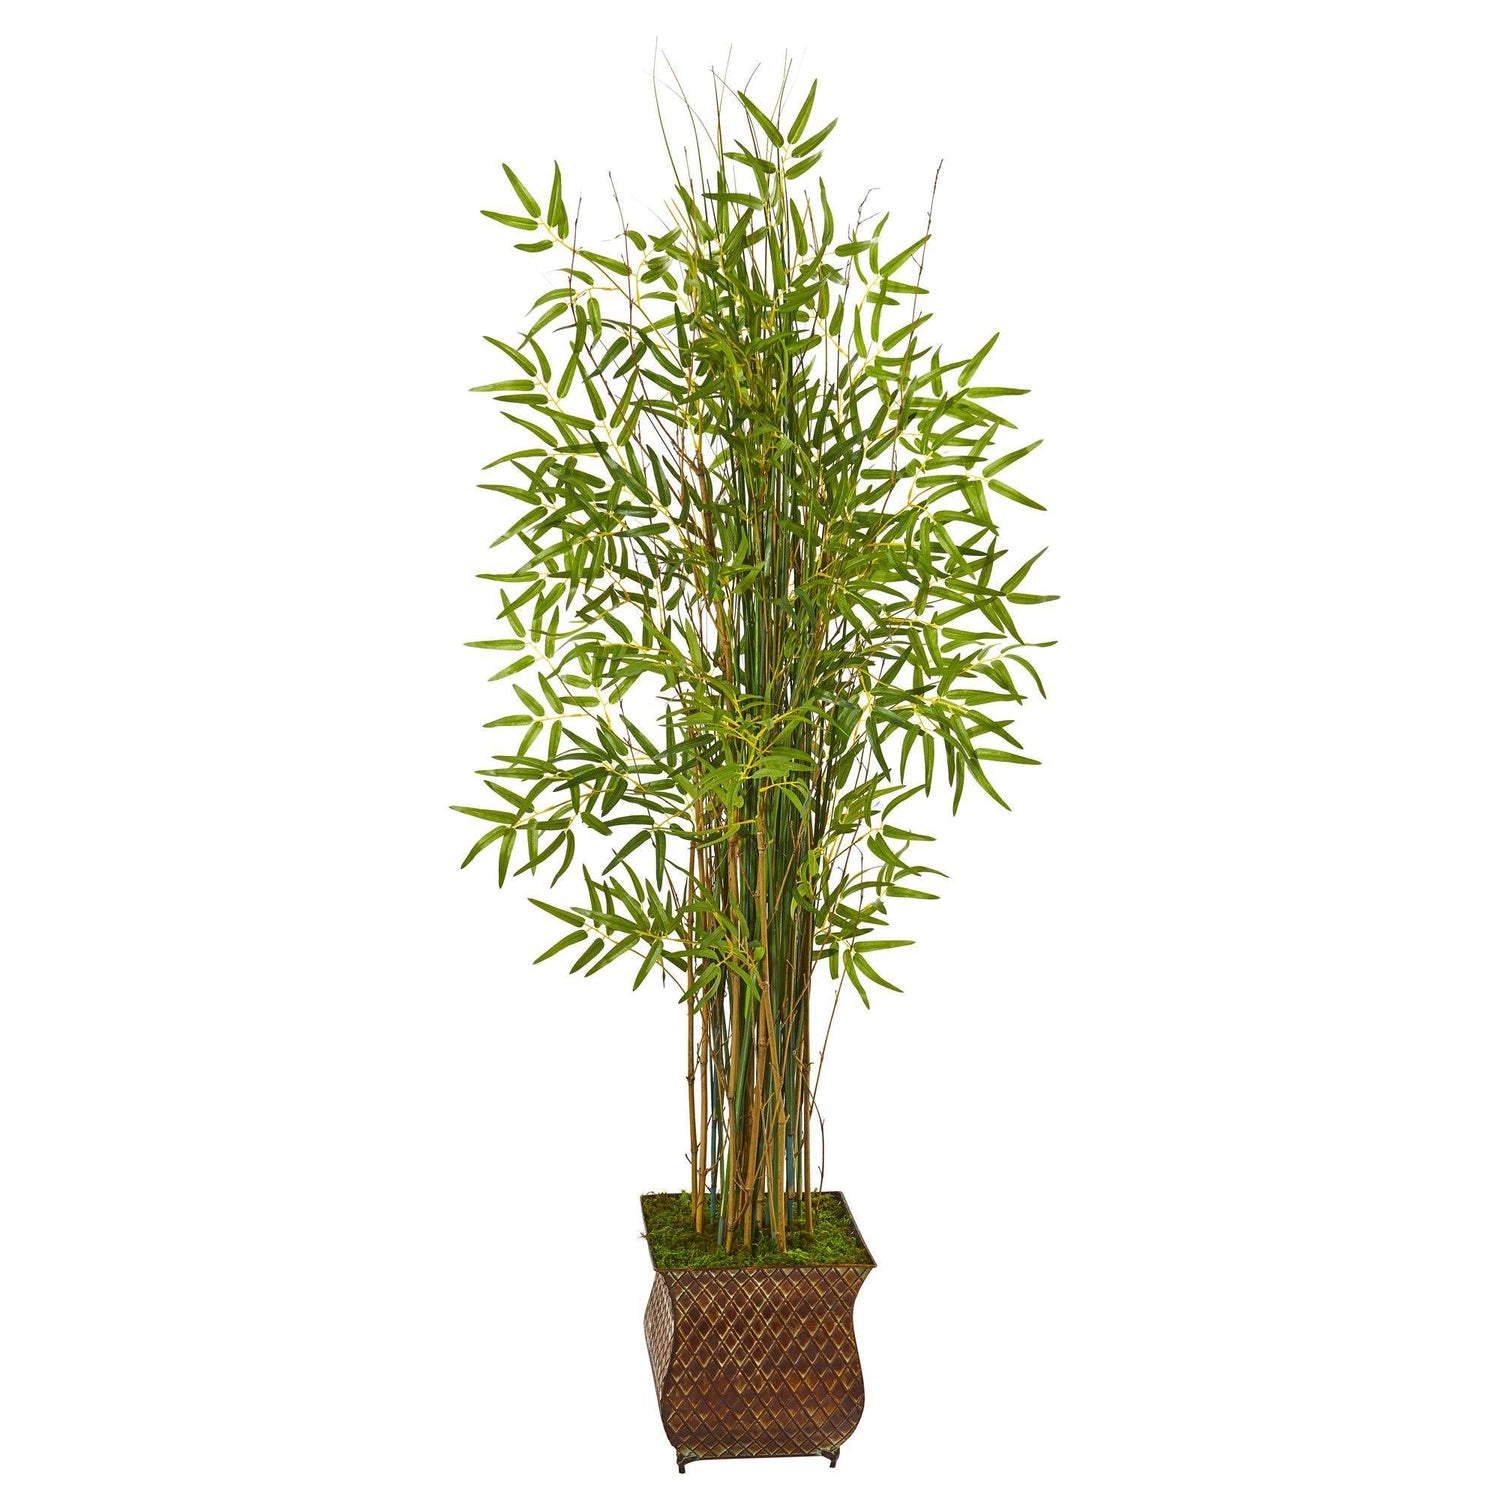 64” Bamboo Grass Artificial Plant in Metal Planter